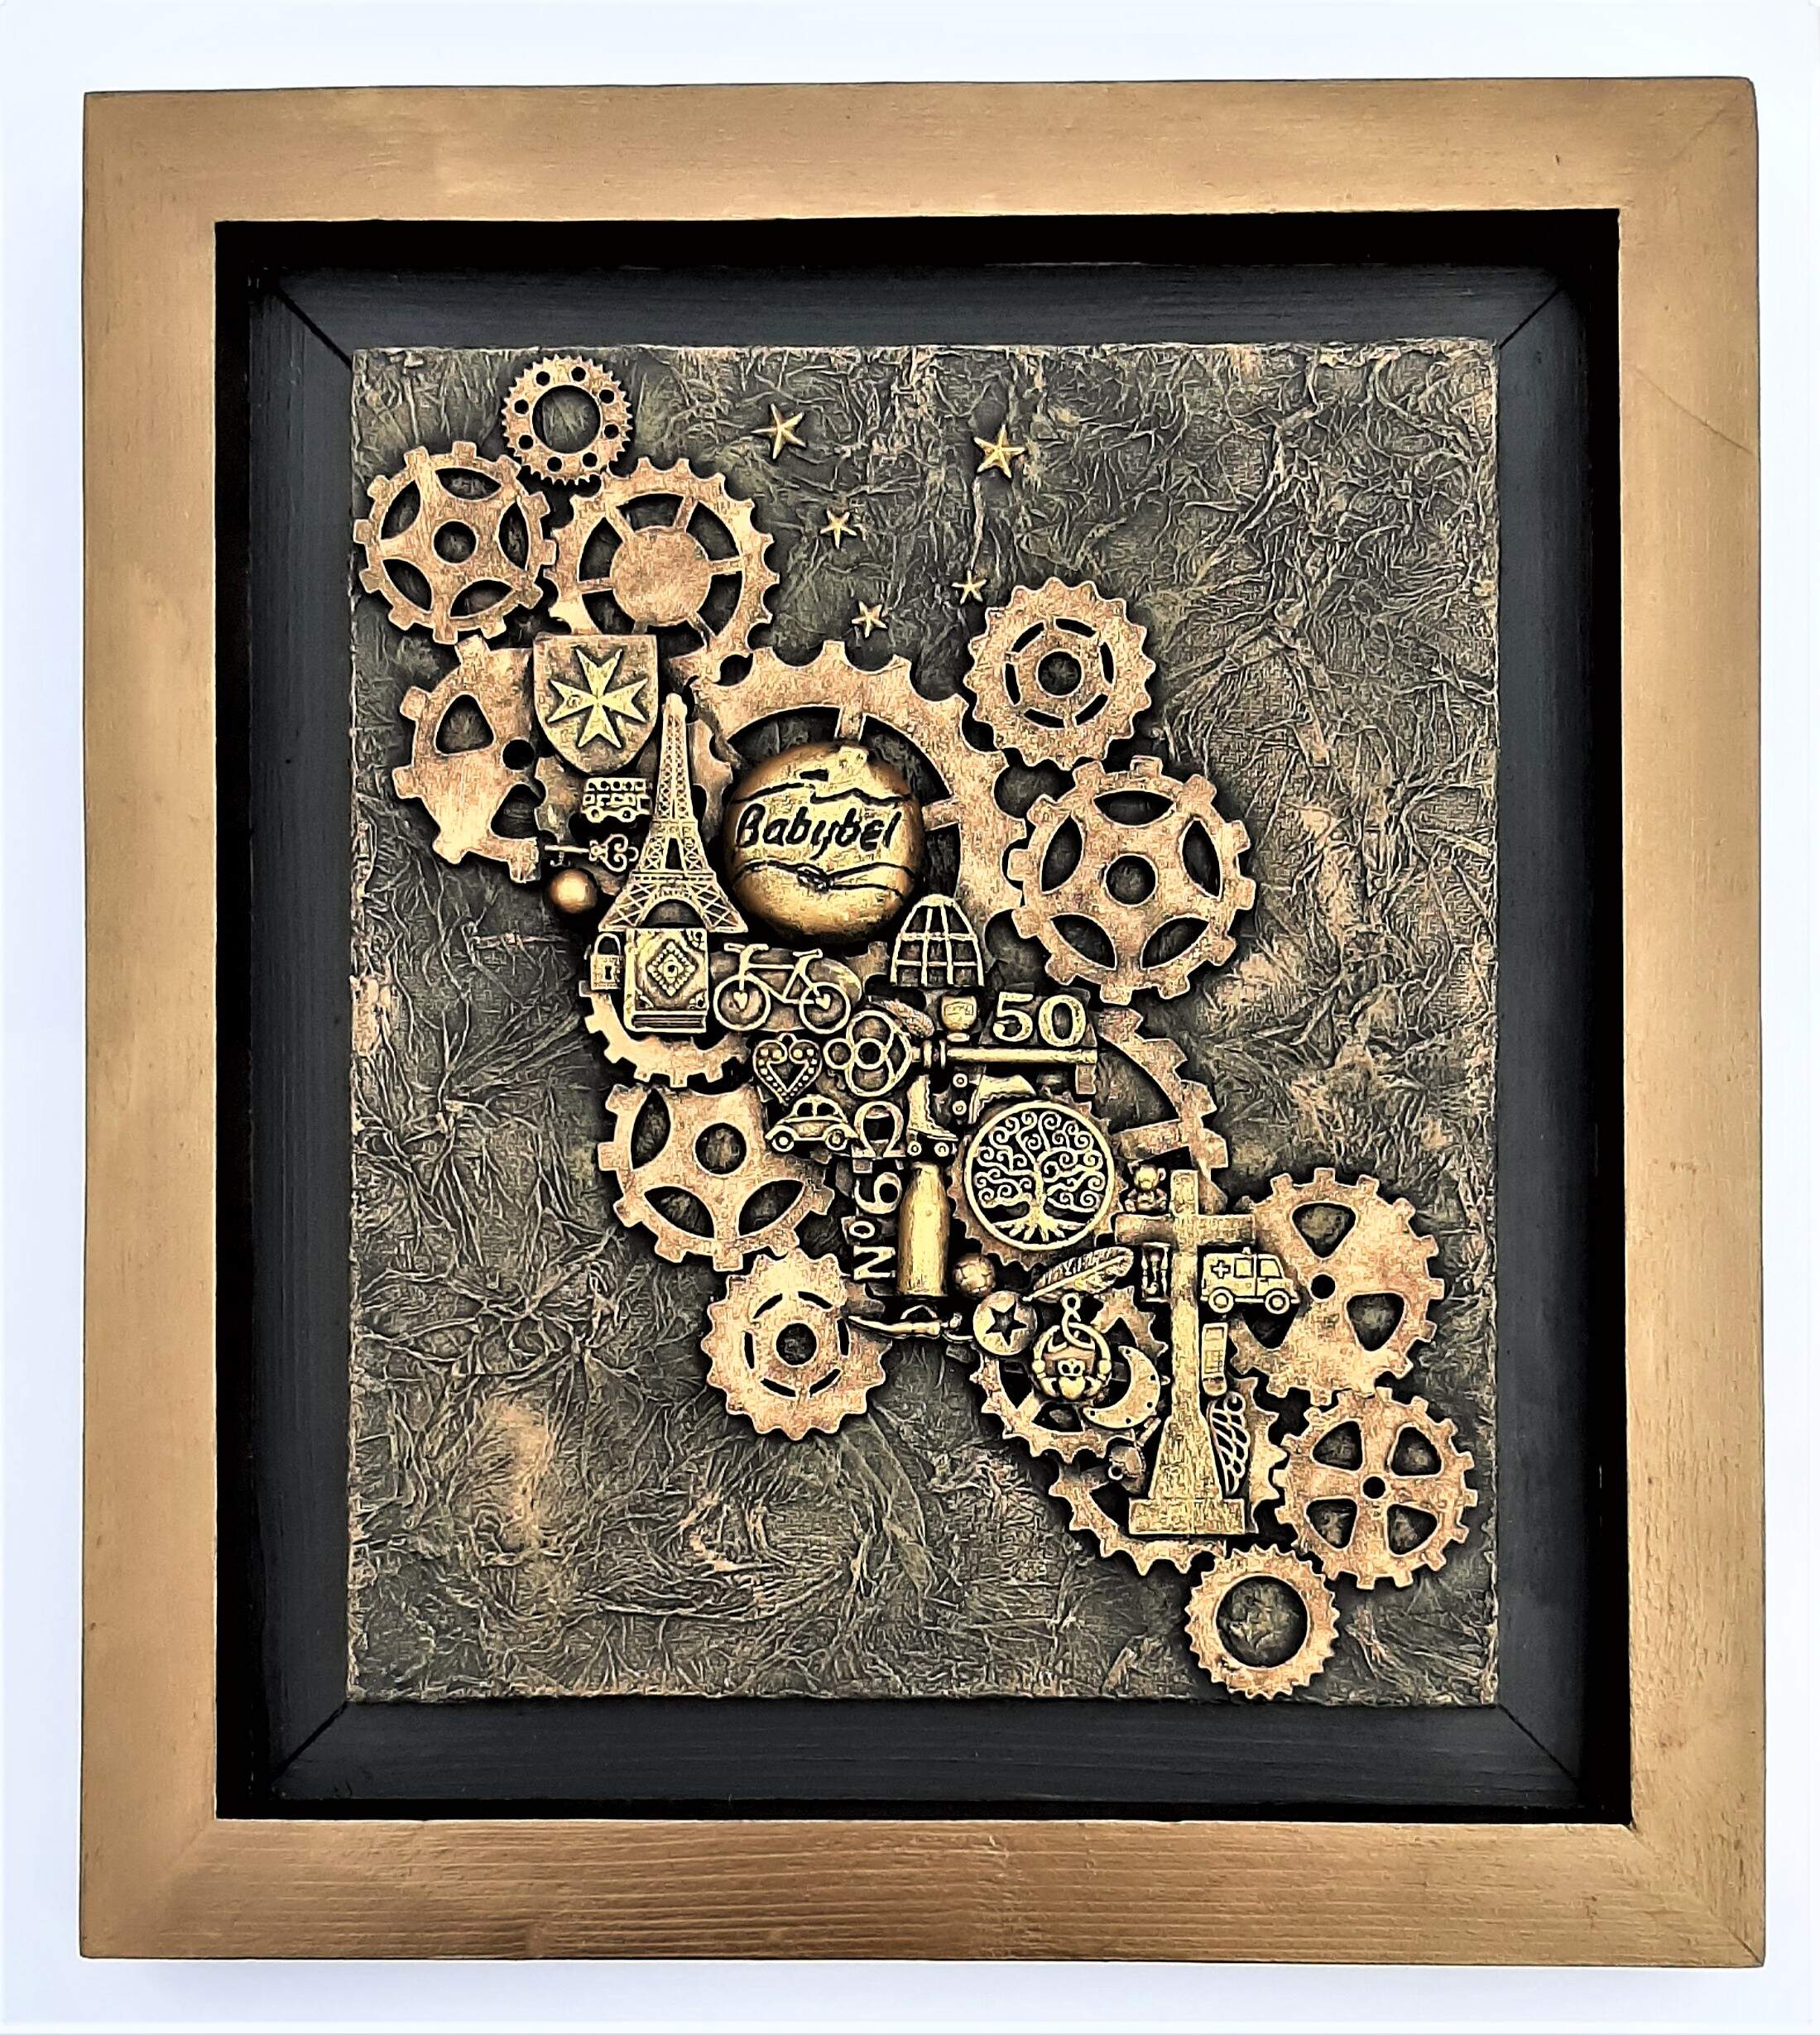 Personalised commissioned mixed media with handmade wooden frame, 35cm x 30cm